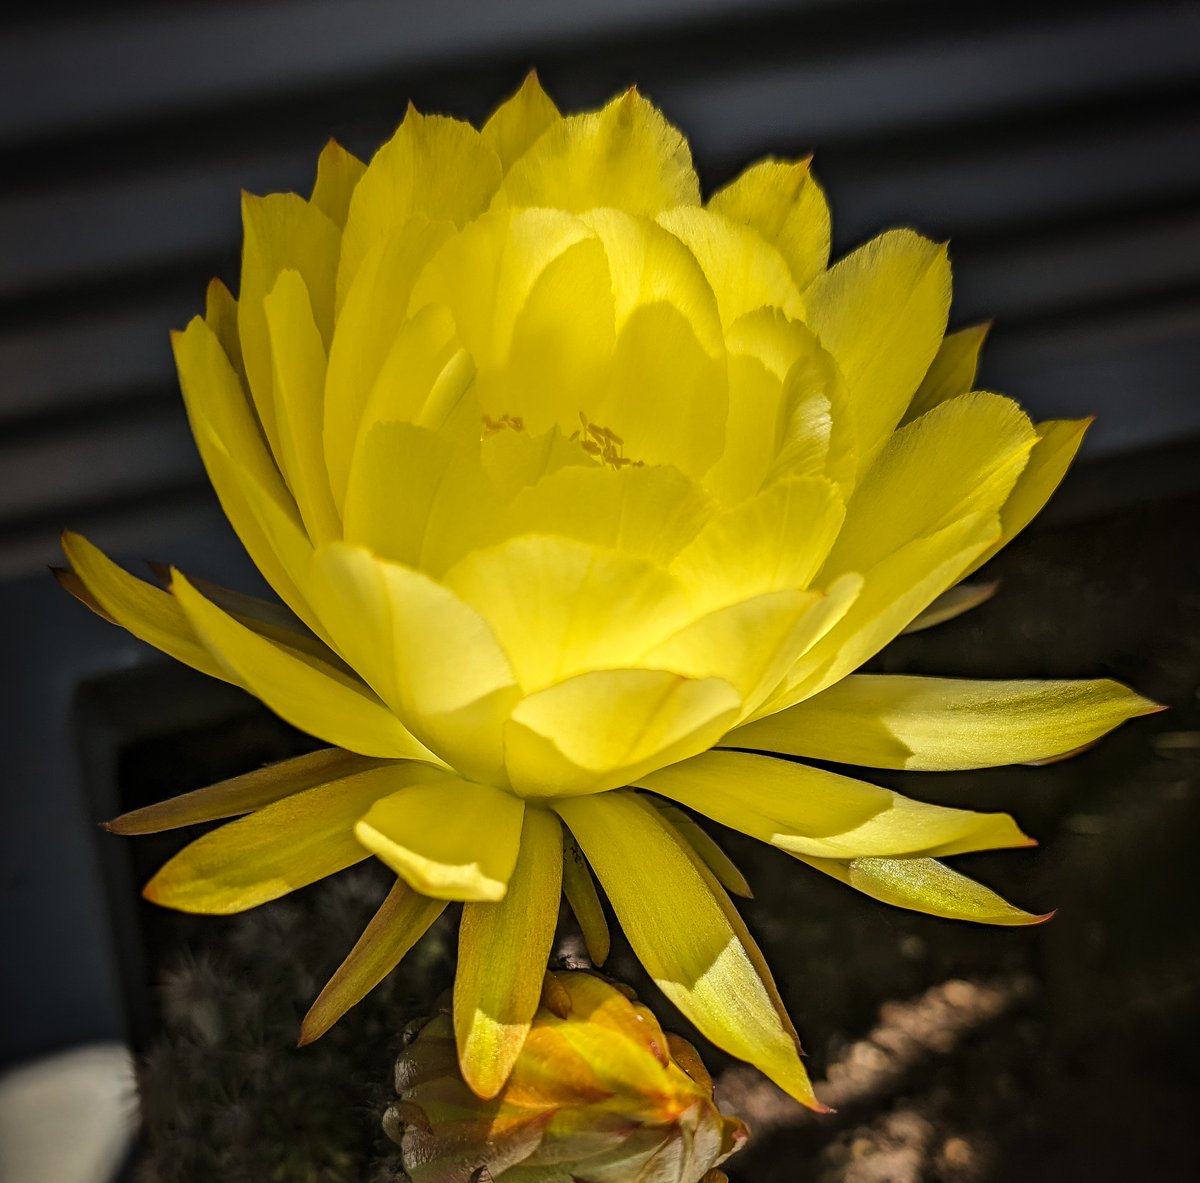 Midday cactus flower.  Not many more until next year.  #flowerlovers